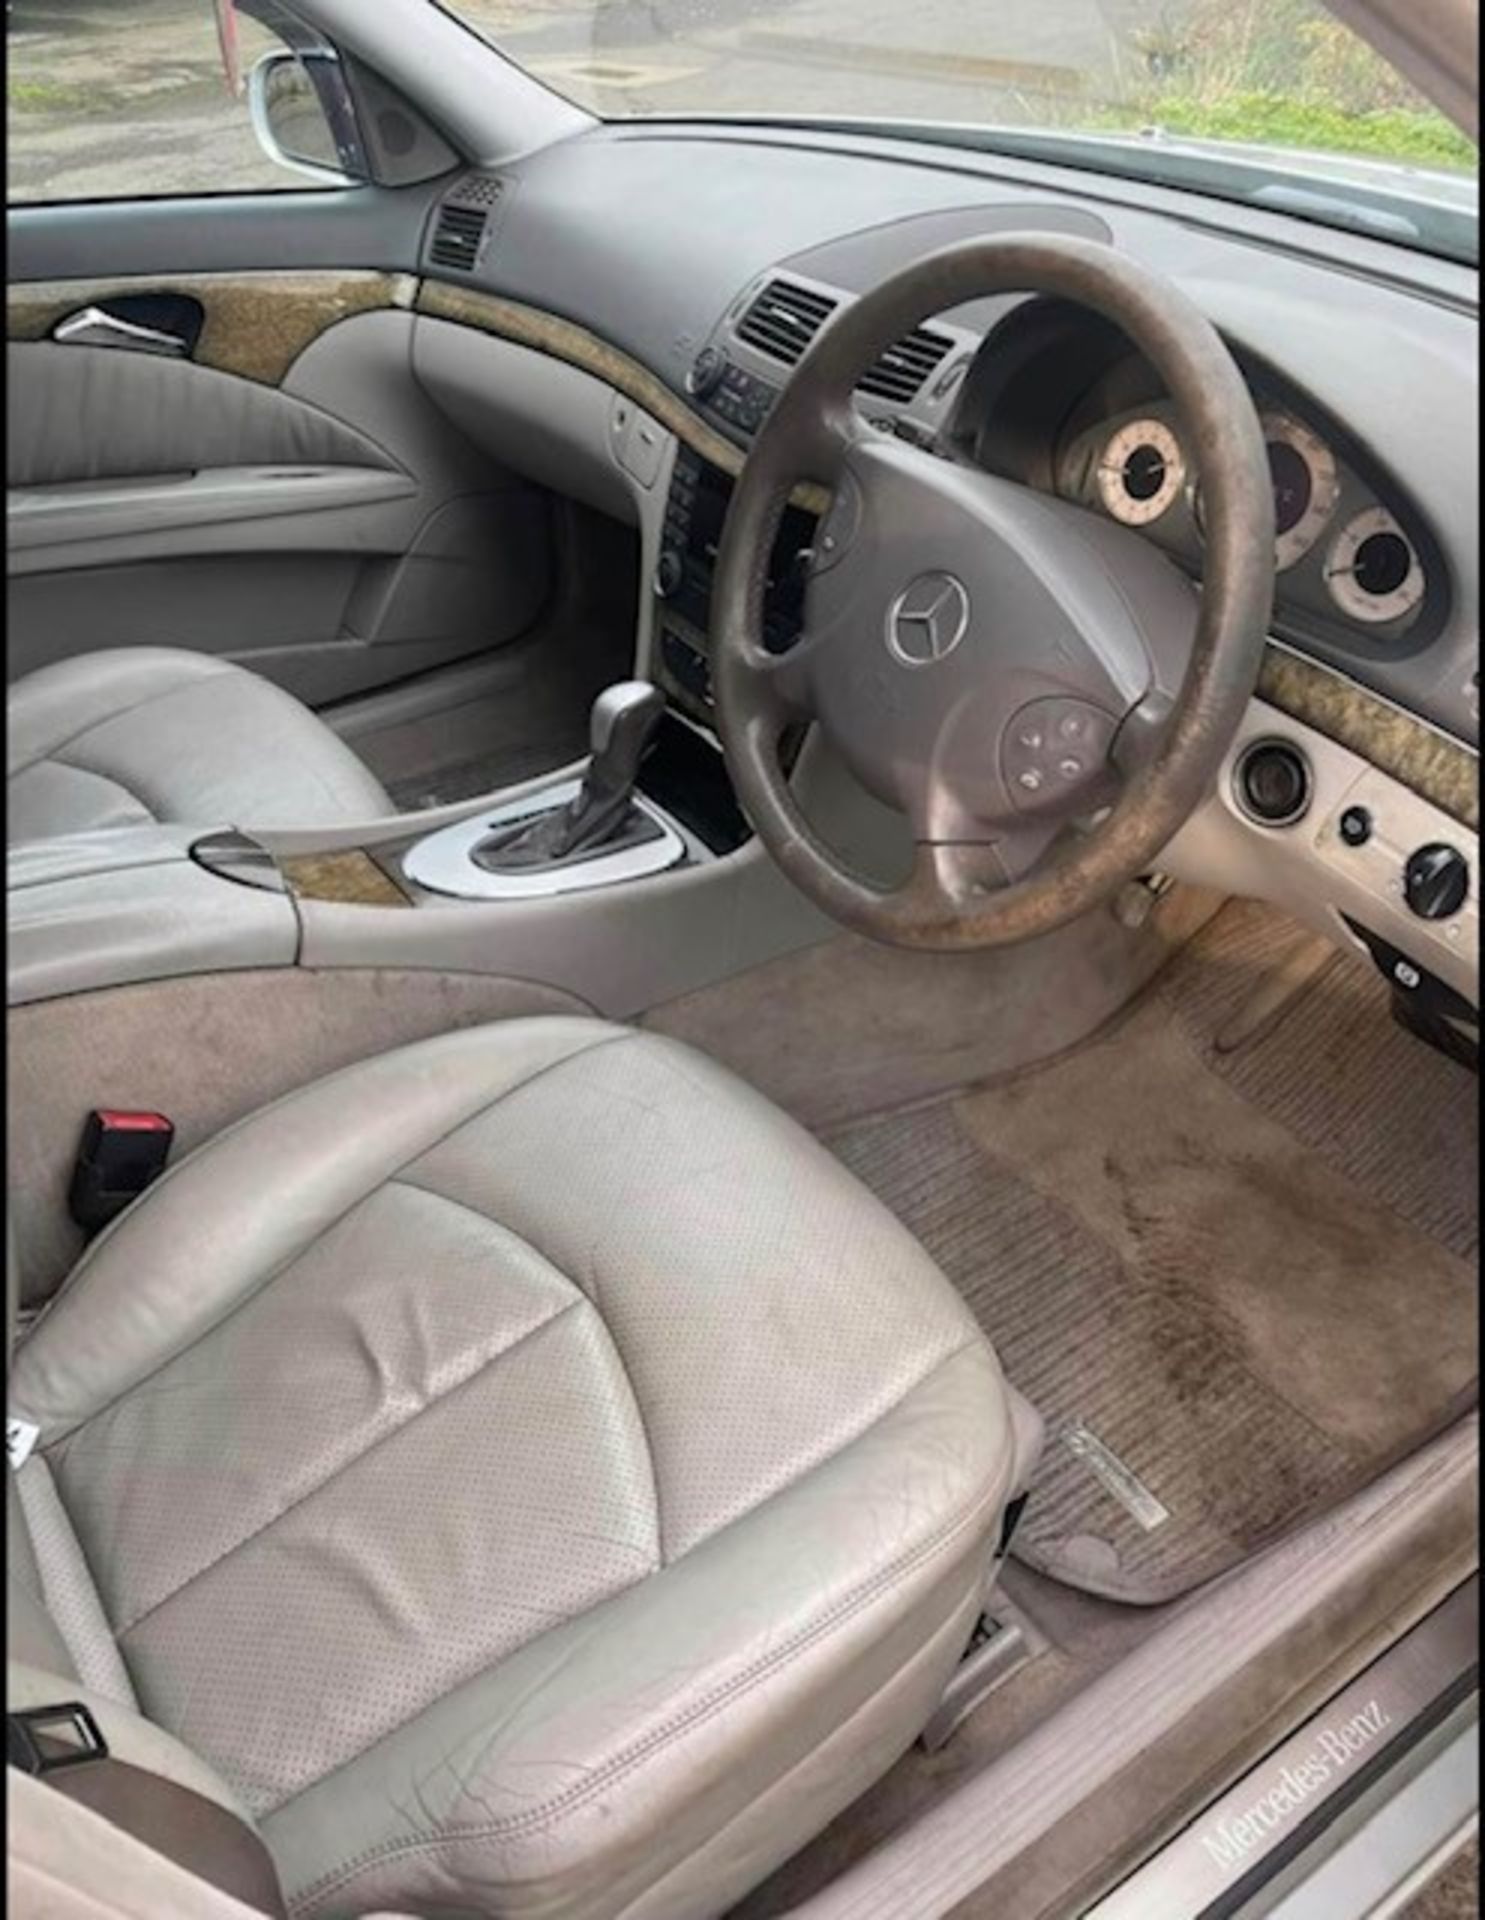 Mercedes E320 CDI 103k genuine miles , mot untill aug 23 as per pictures has scratches as shown in - Image 14 of 14